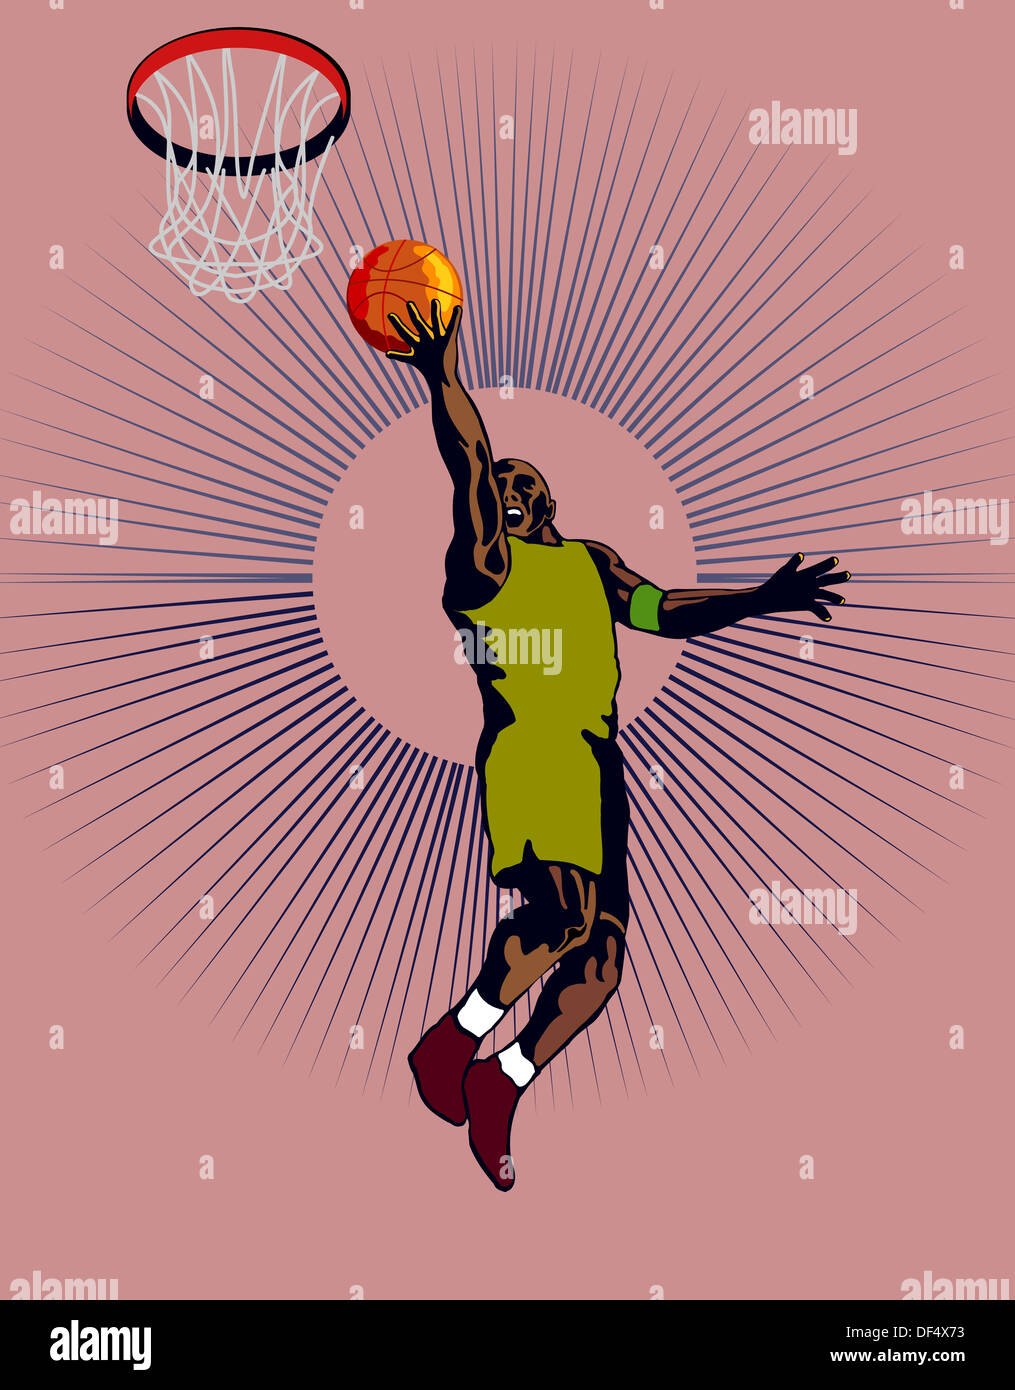 Illustration of a green basketball player dunking ball. Stock Photo